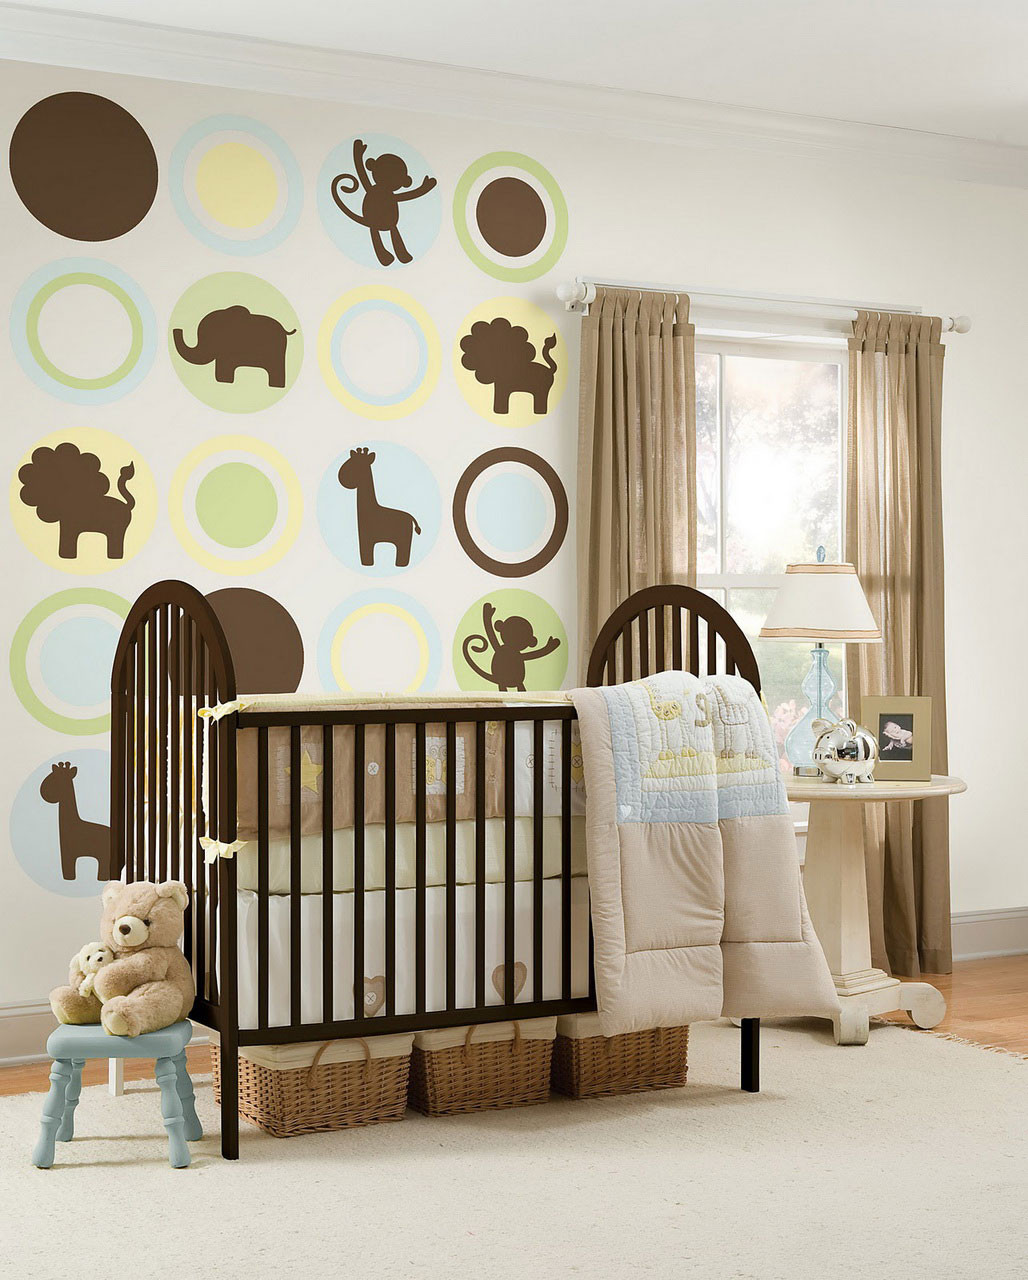 Room Decor For Baby
 Dream Nursery for Your Baby